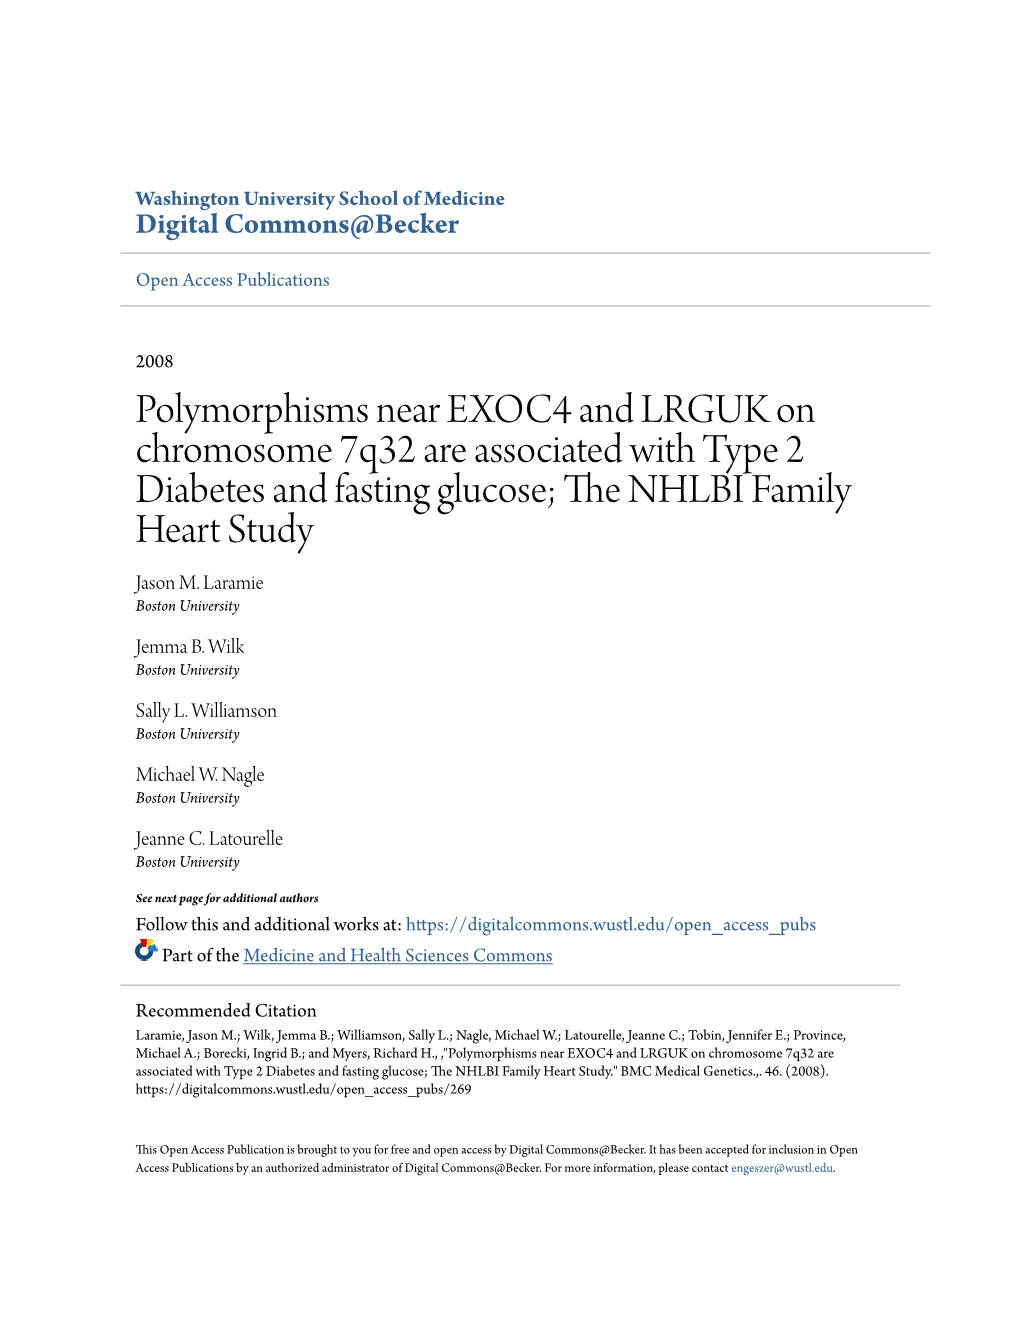 Polymorphisms Near EXOC4 and LRGUK on Chromosome 7Q32 Are Associated with Type 2 Diabetes and Fasting Glucose; the NHLBI Family Heart Study Jason M